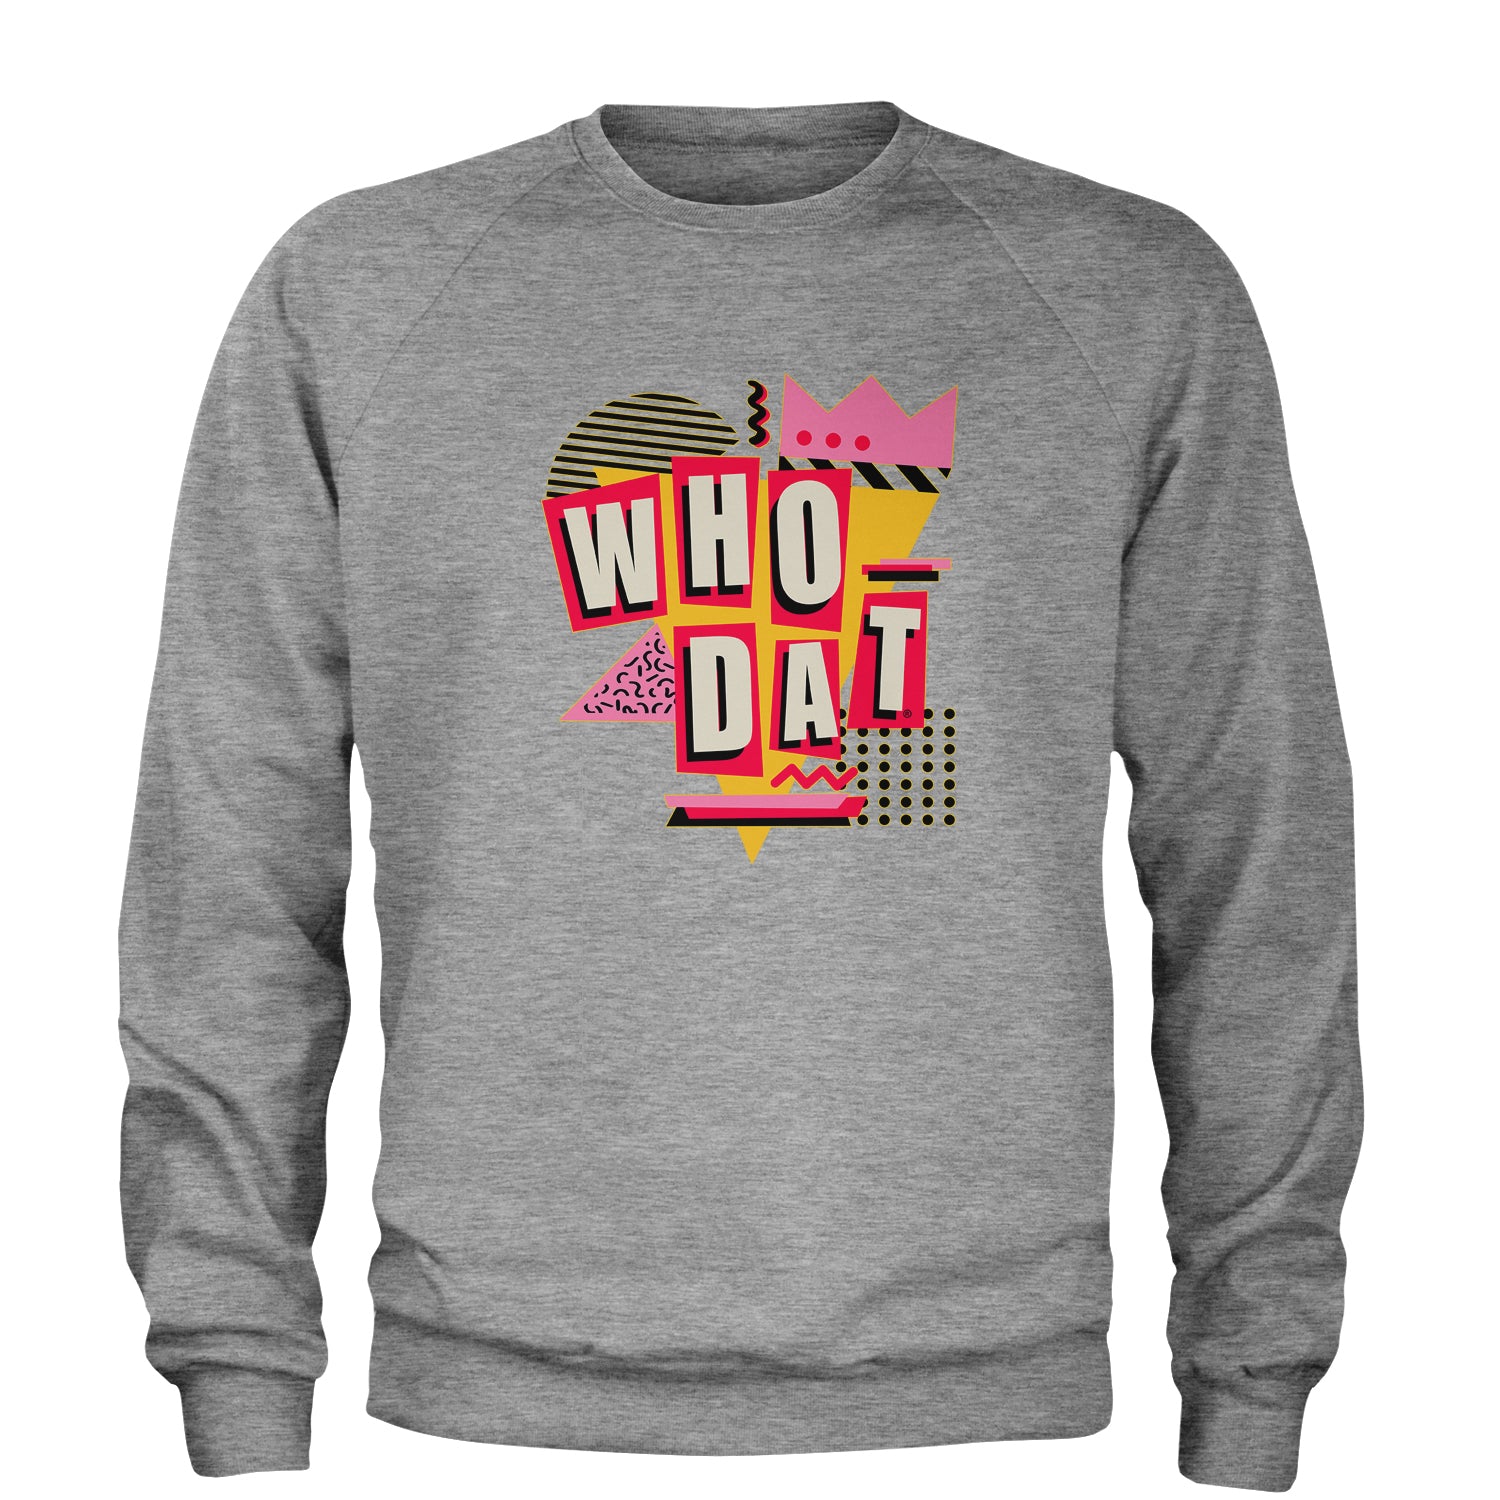 Who Dat New Orleans Adult Crewneck Sweatshirt brees, colston, drew, louisiana, marques, payton, sean by Expression Tees